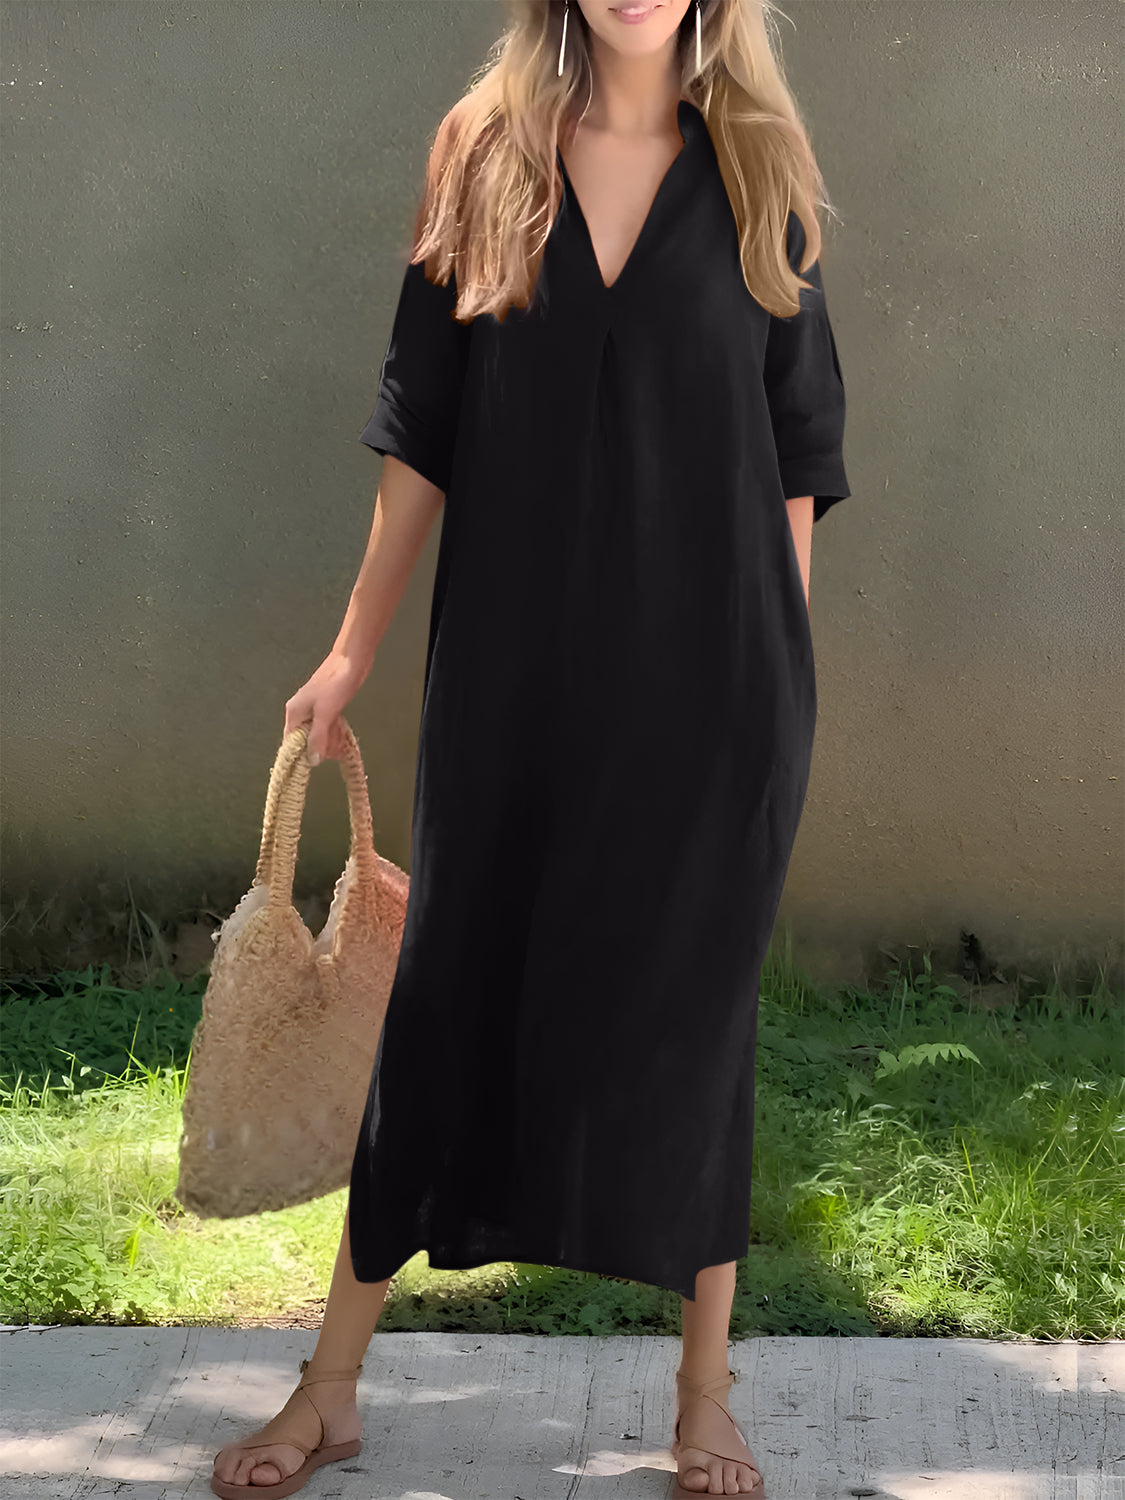 Lightweight black maxi dress with a classic V-neckline and side pockets.